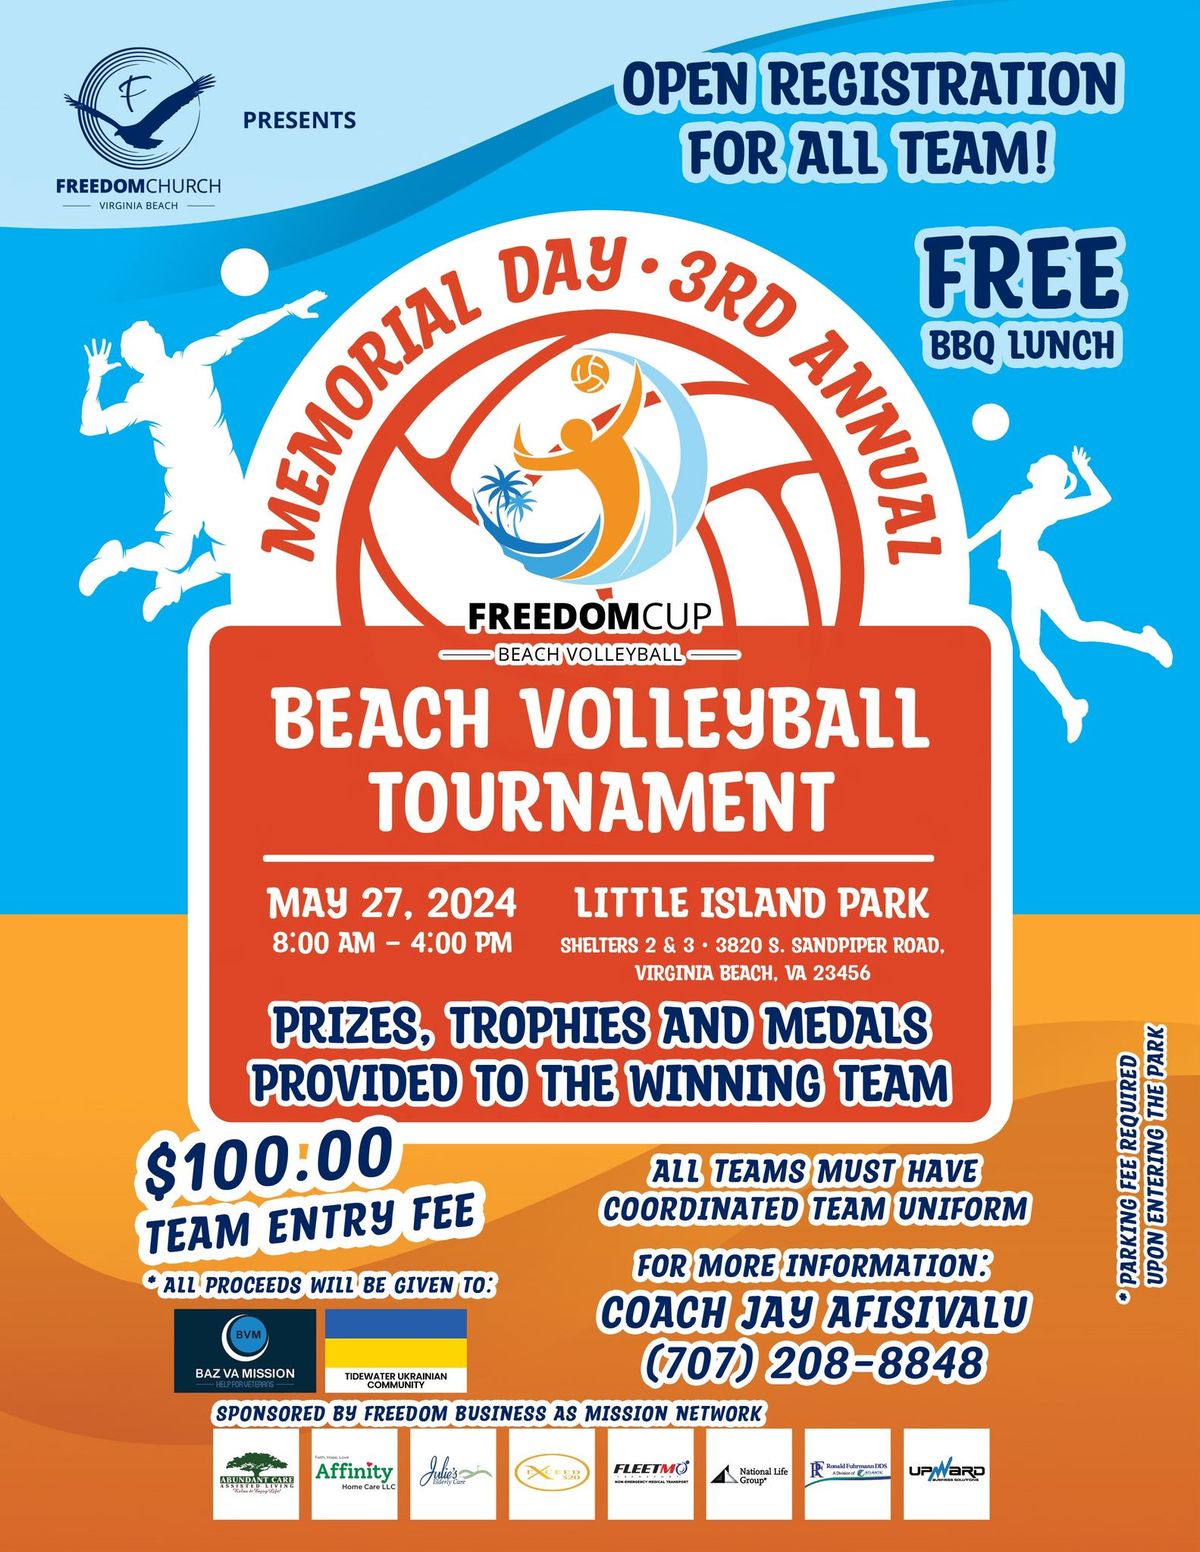 Freedom Cup Beach Volleyball Tournament